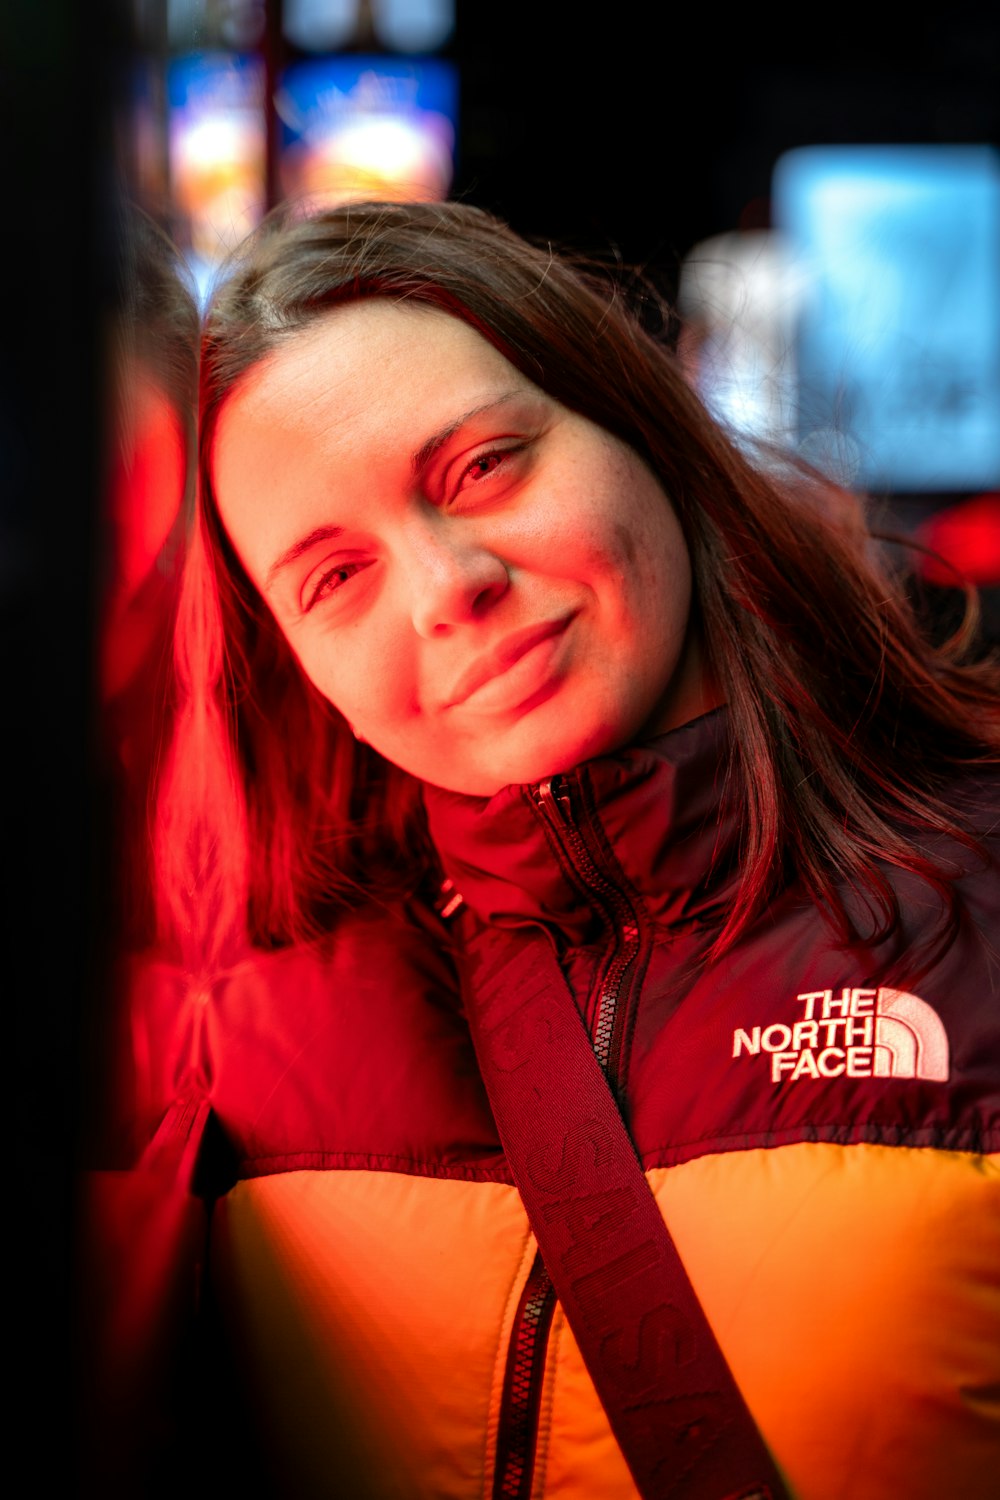 a woman with long hair wearing a red and yellow jacket